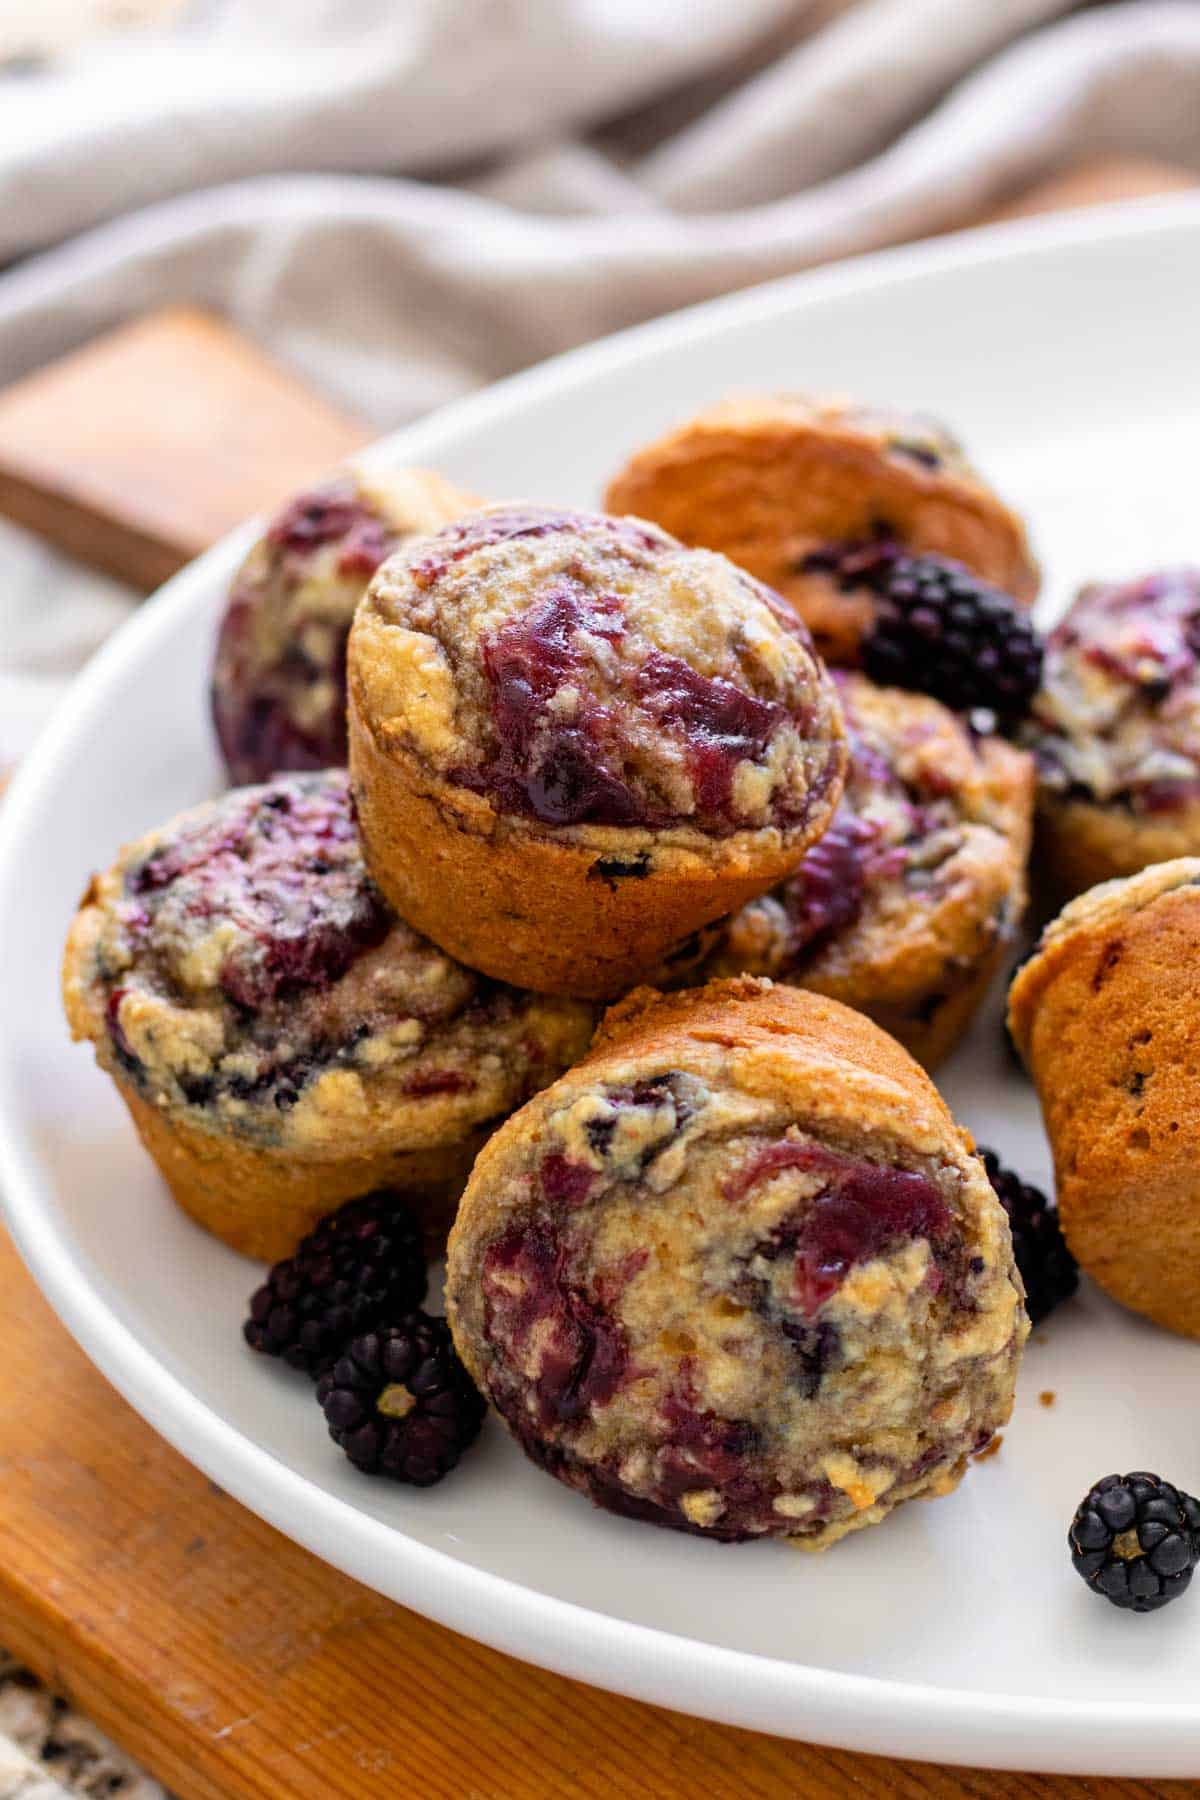 Muffins on white serving tray with fresh blackberries.